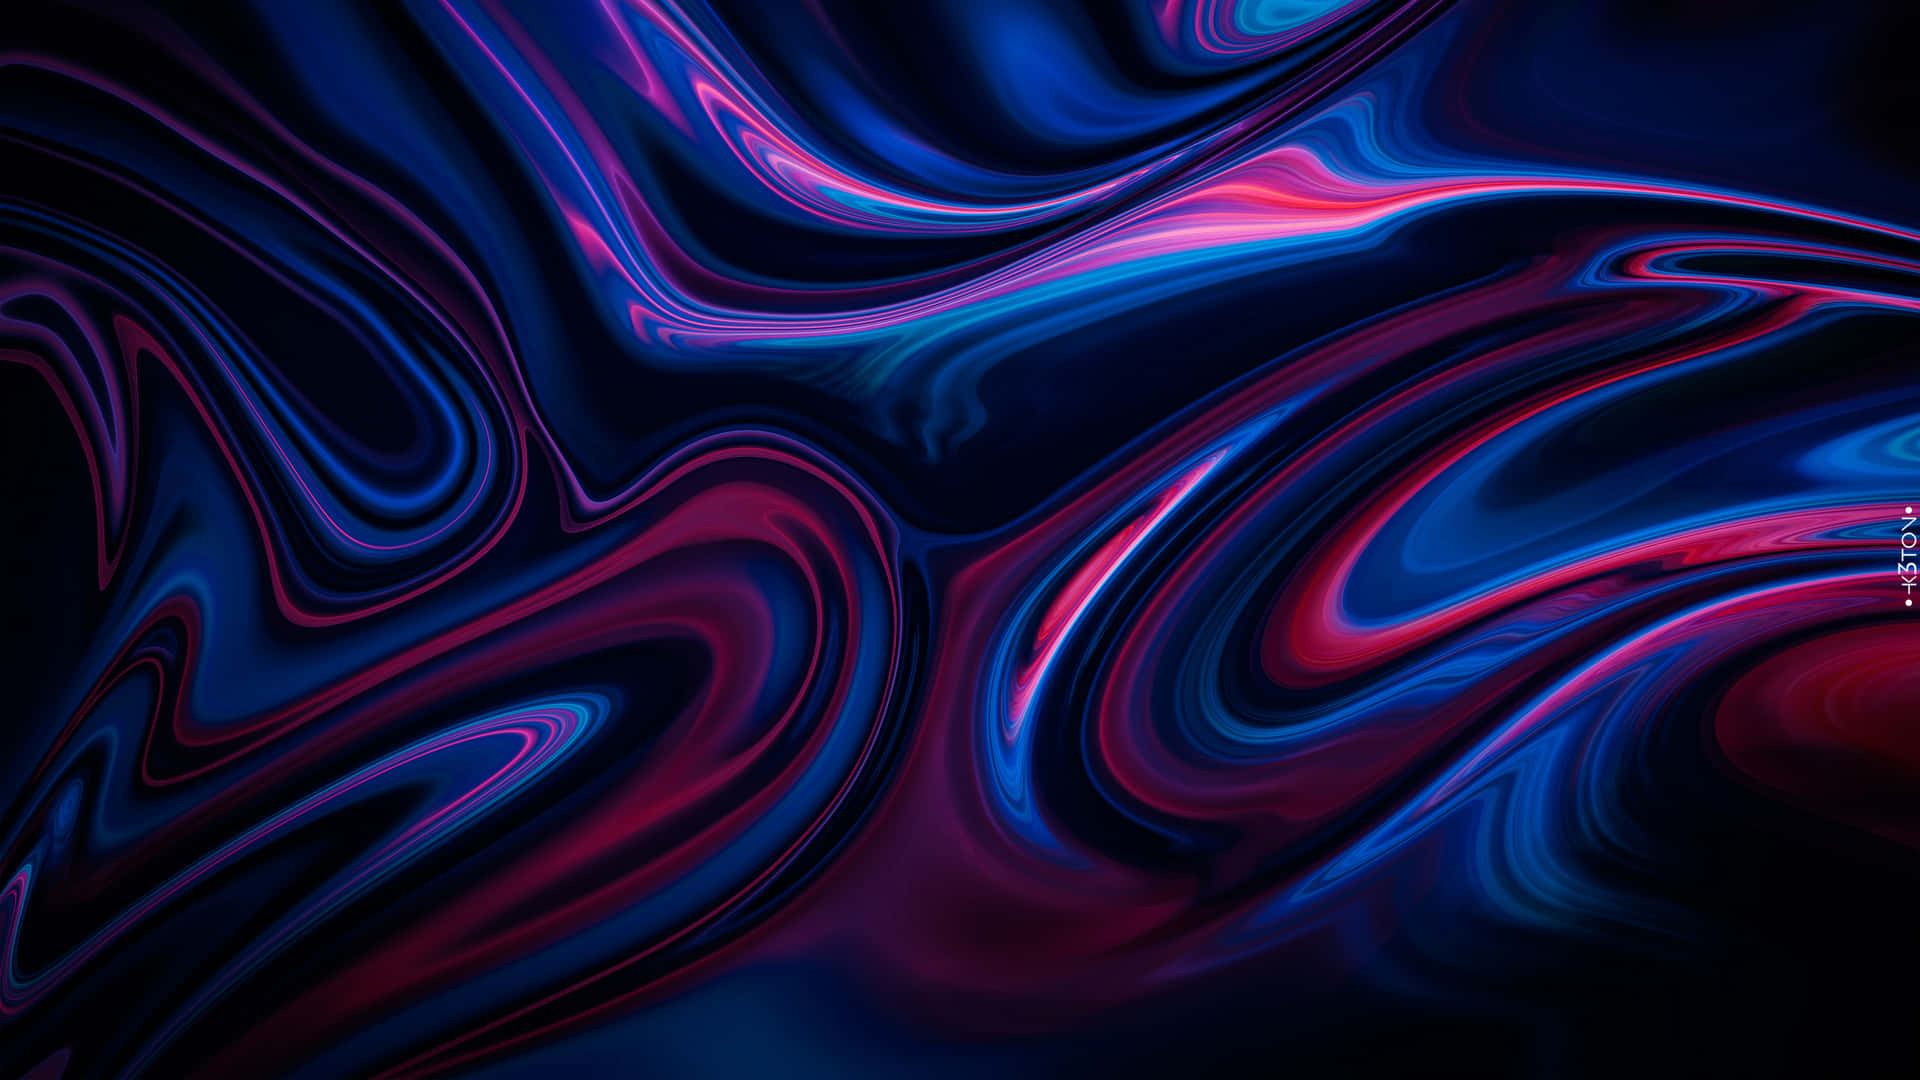 A Blue And Purple Swirled Background Wallpaper